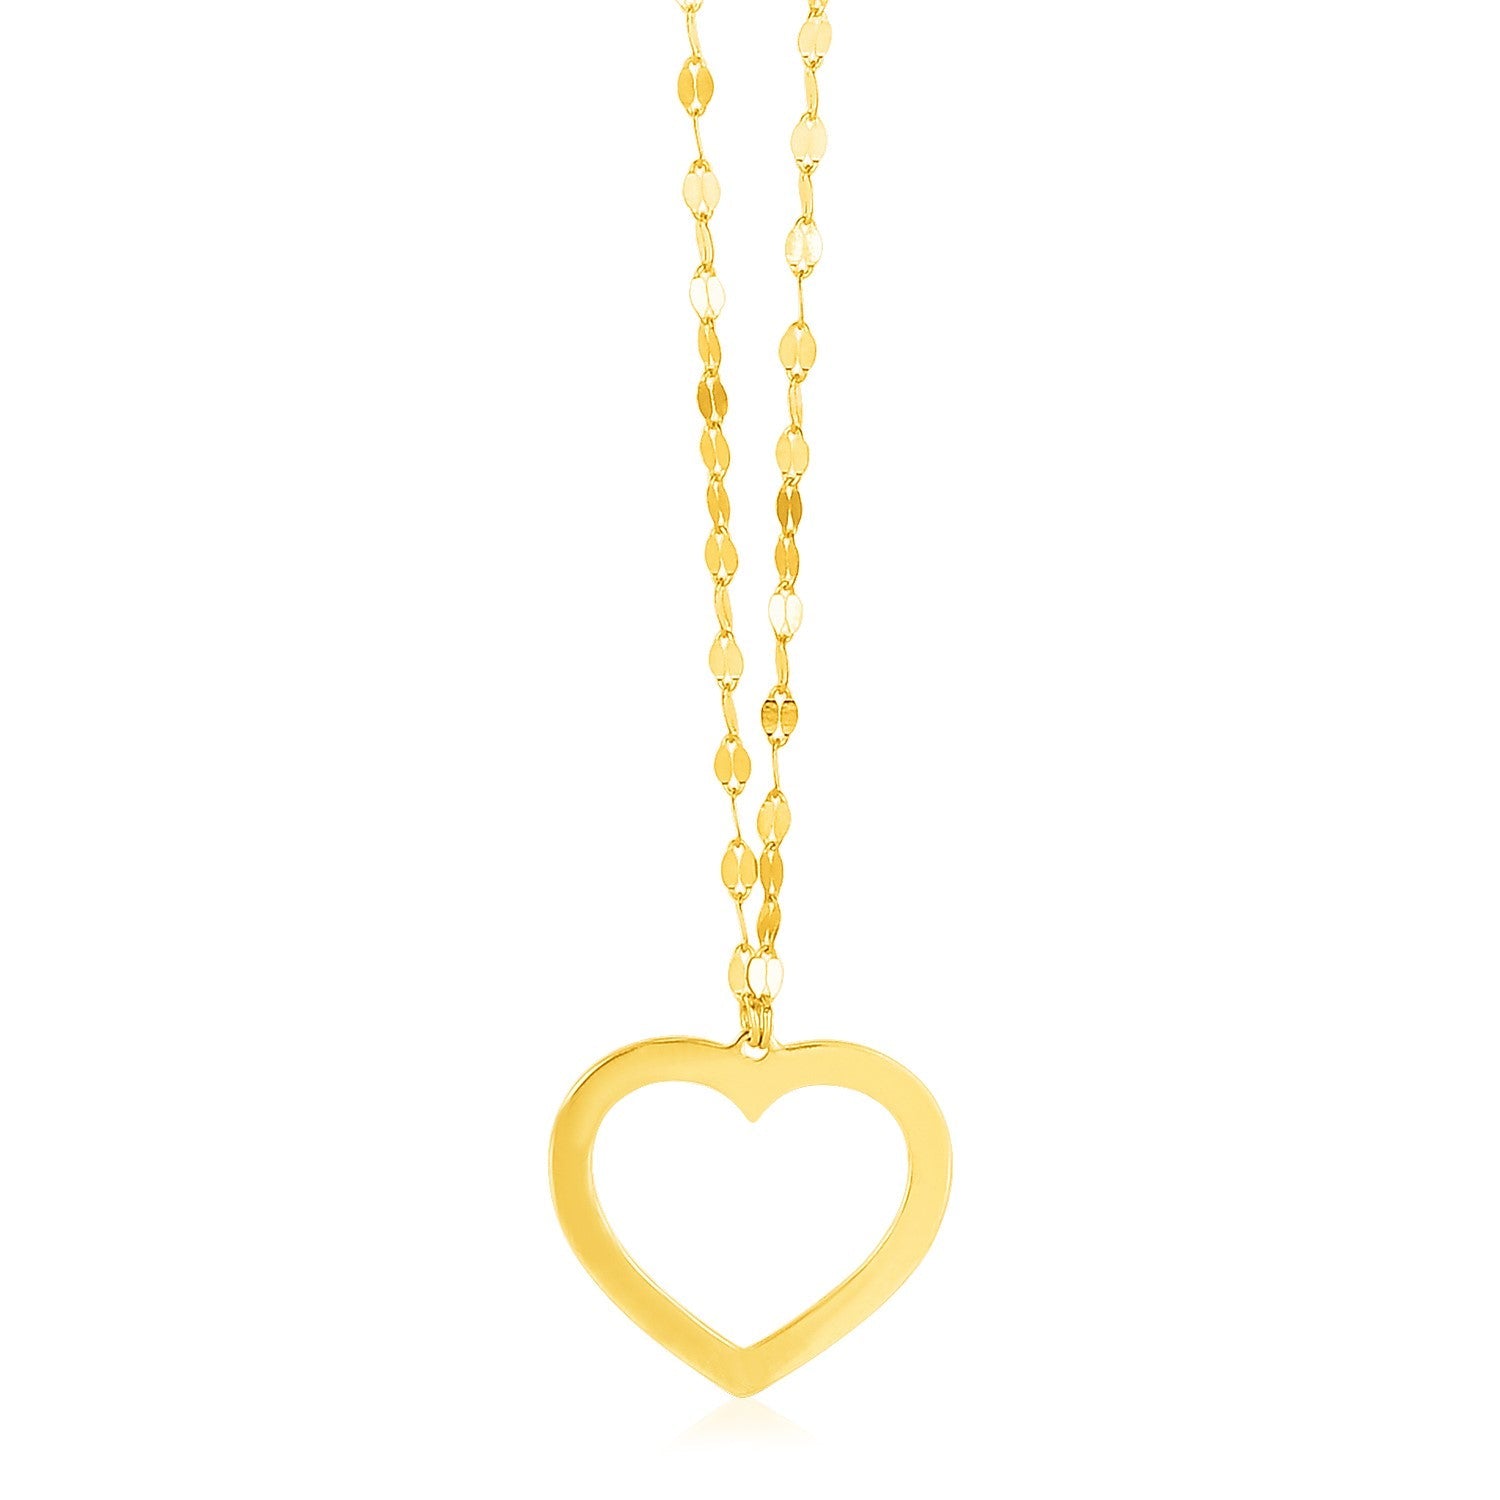 14k Yellow Gold Necklace with Reversible Heart Pendant - LinkagejewelrydesignLinkagejewelrydesign